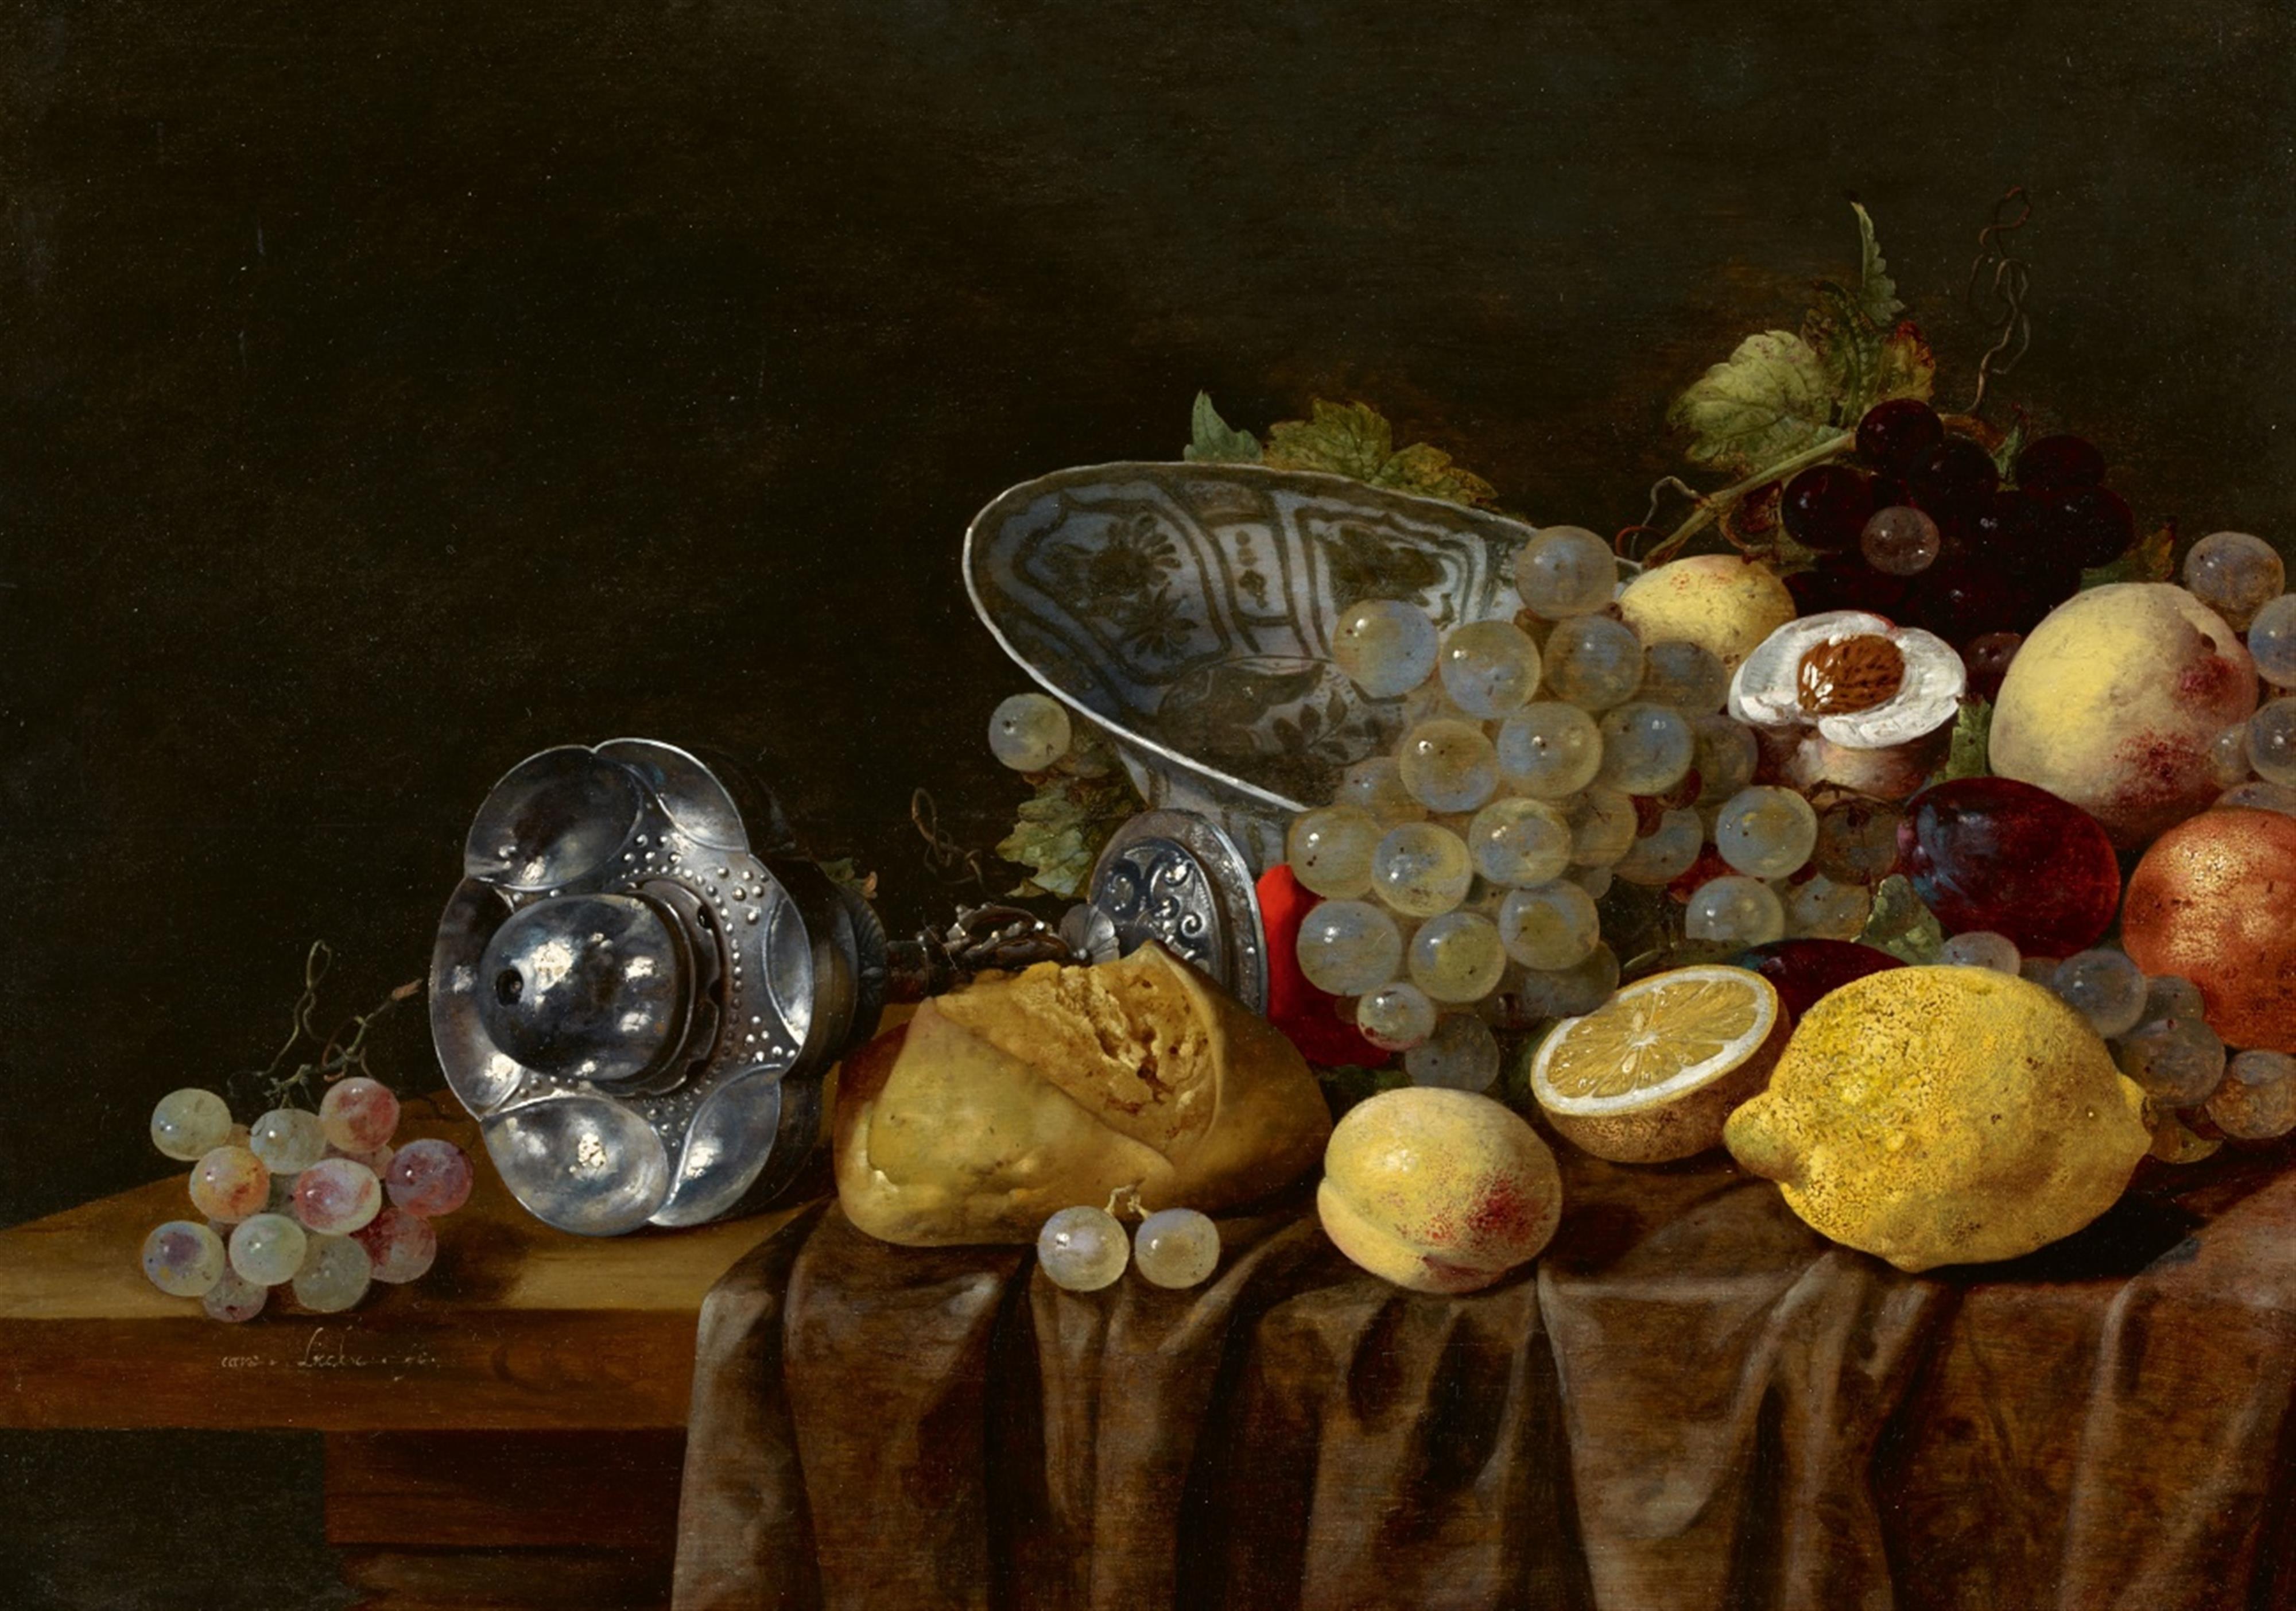 Christiaan Luycks - Still Life with a Silver Chalice, Wanli Bowl, and Fruit - image-1